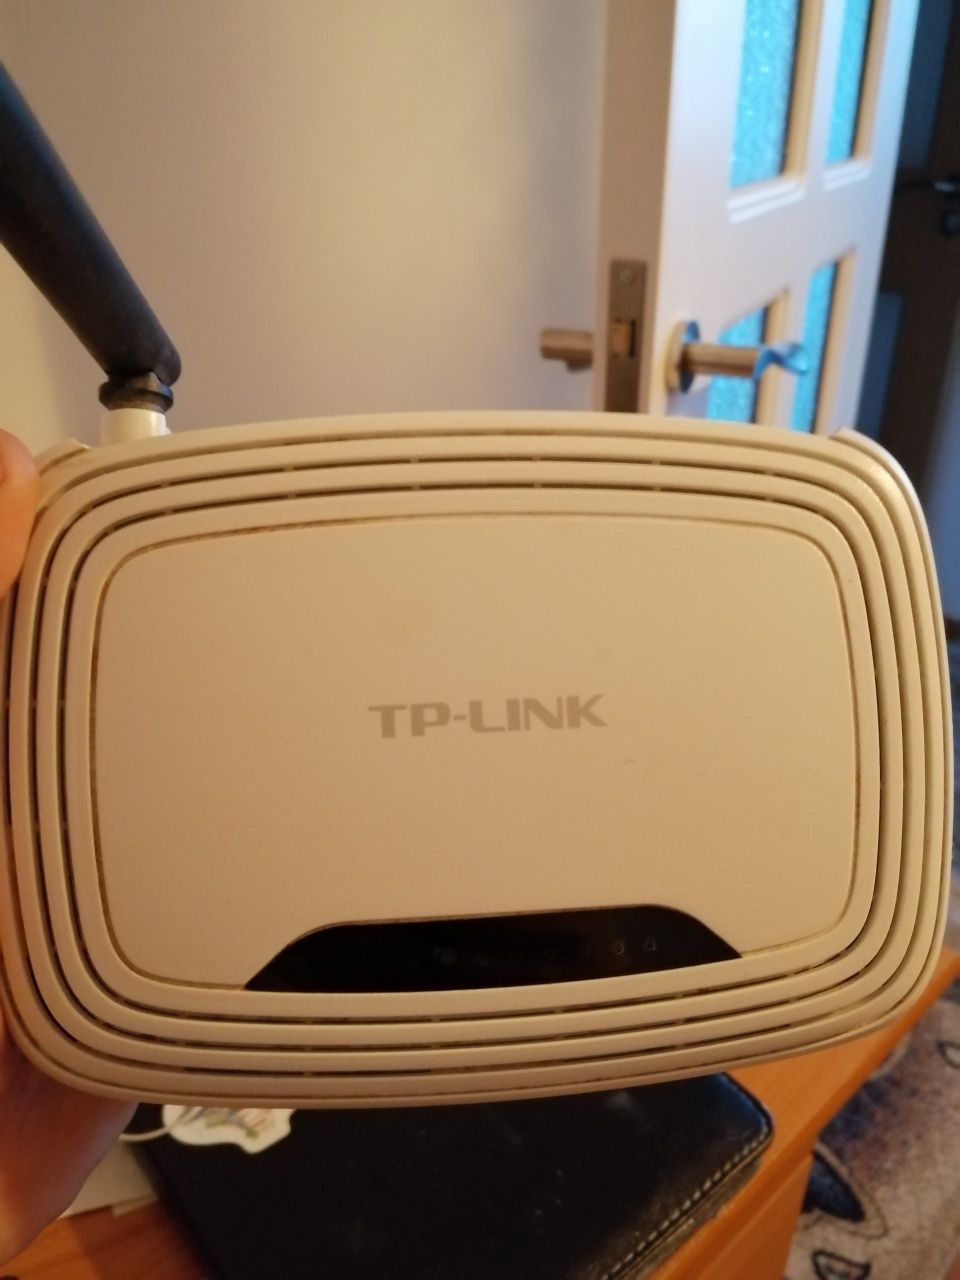 Router tp link